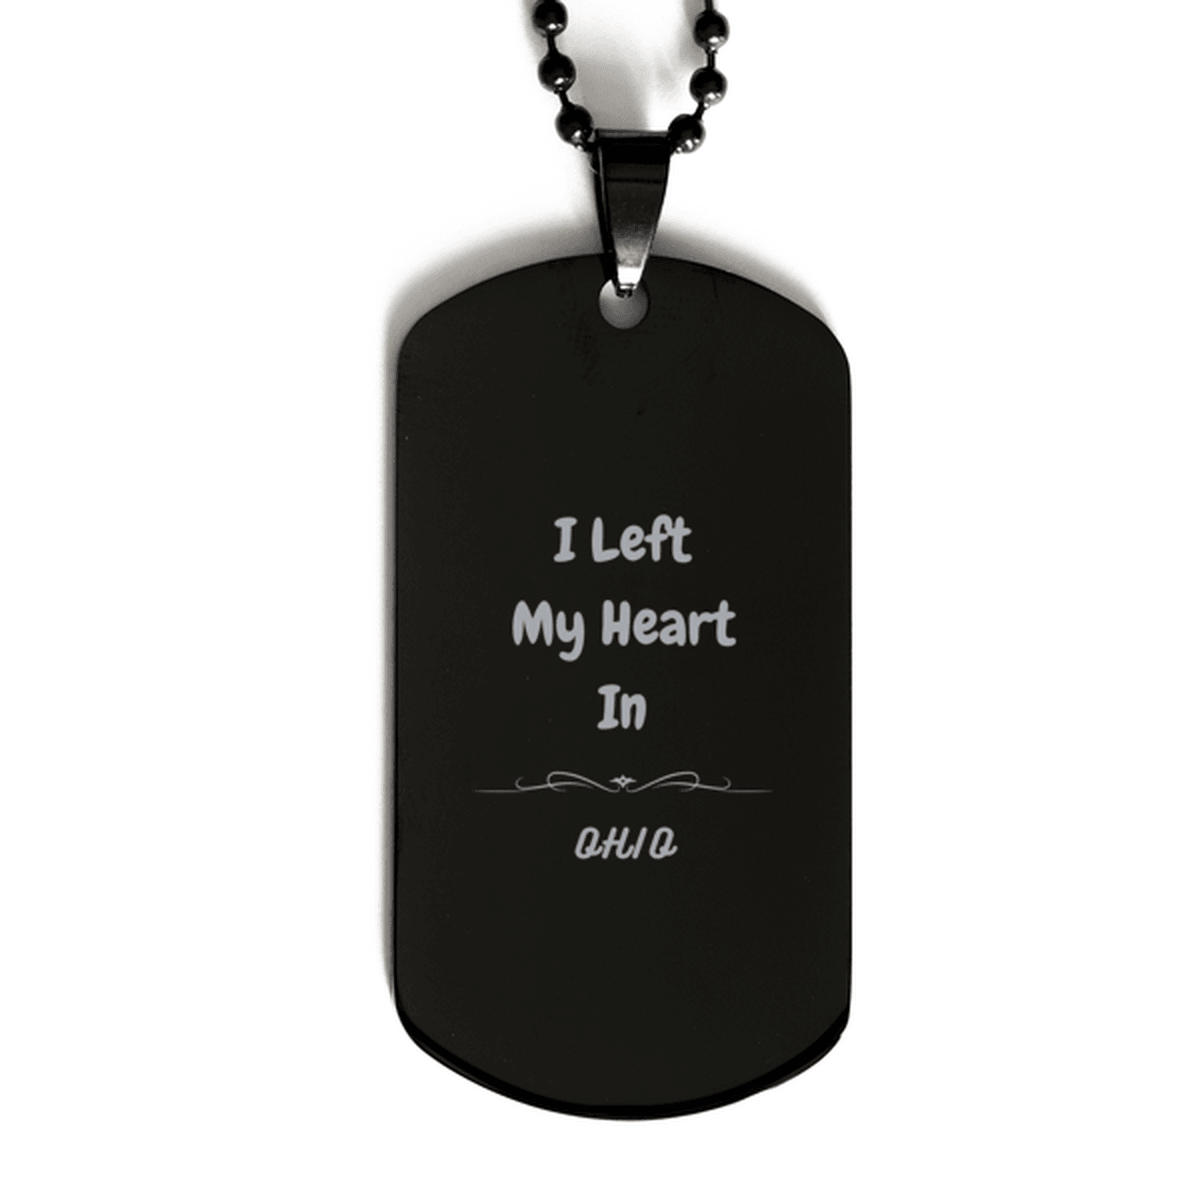 I Left My Heart In Ohio Gifts, Meaningful Ohio State for Friends, Men, Women. Black Dog Tag for Ohio People - Mallard Moon Gift Shop